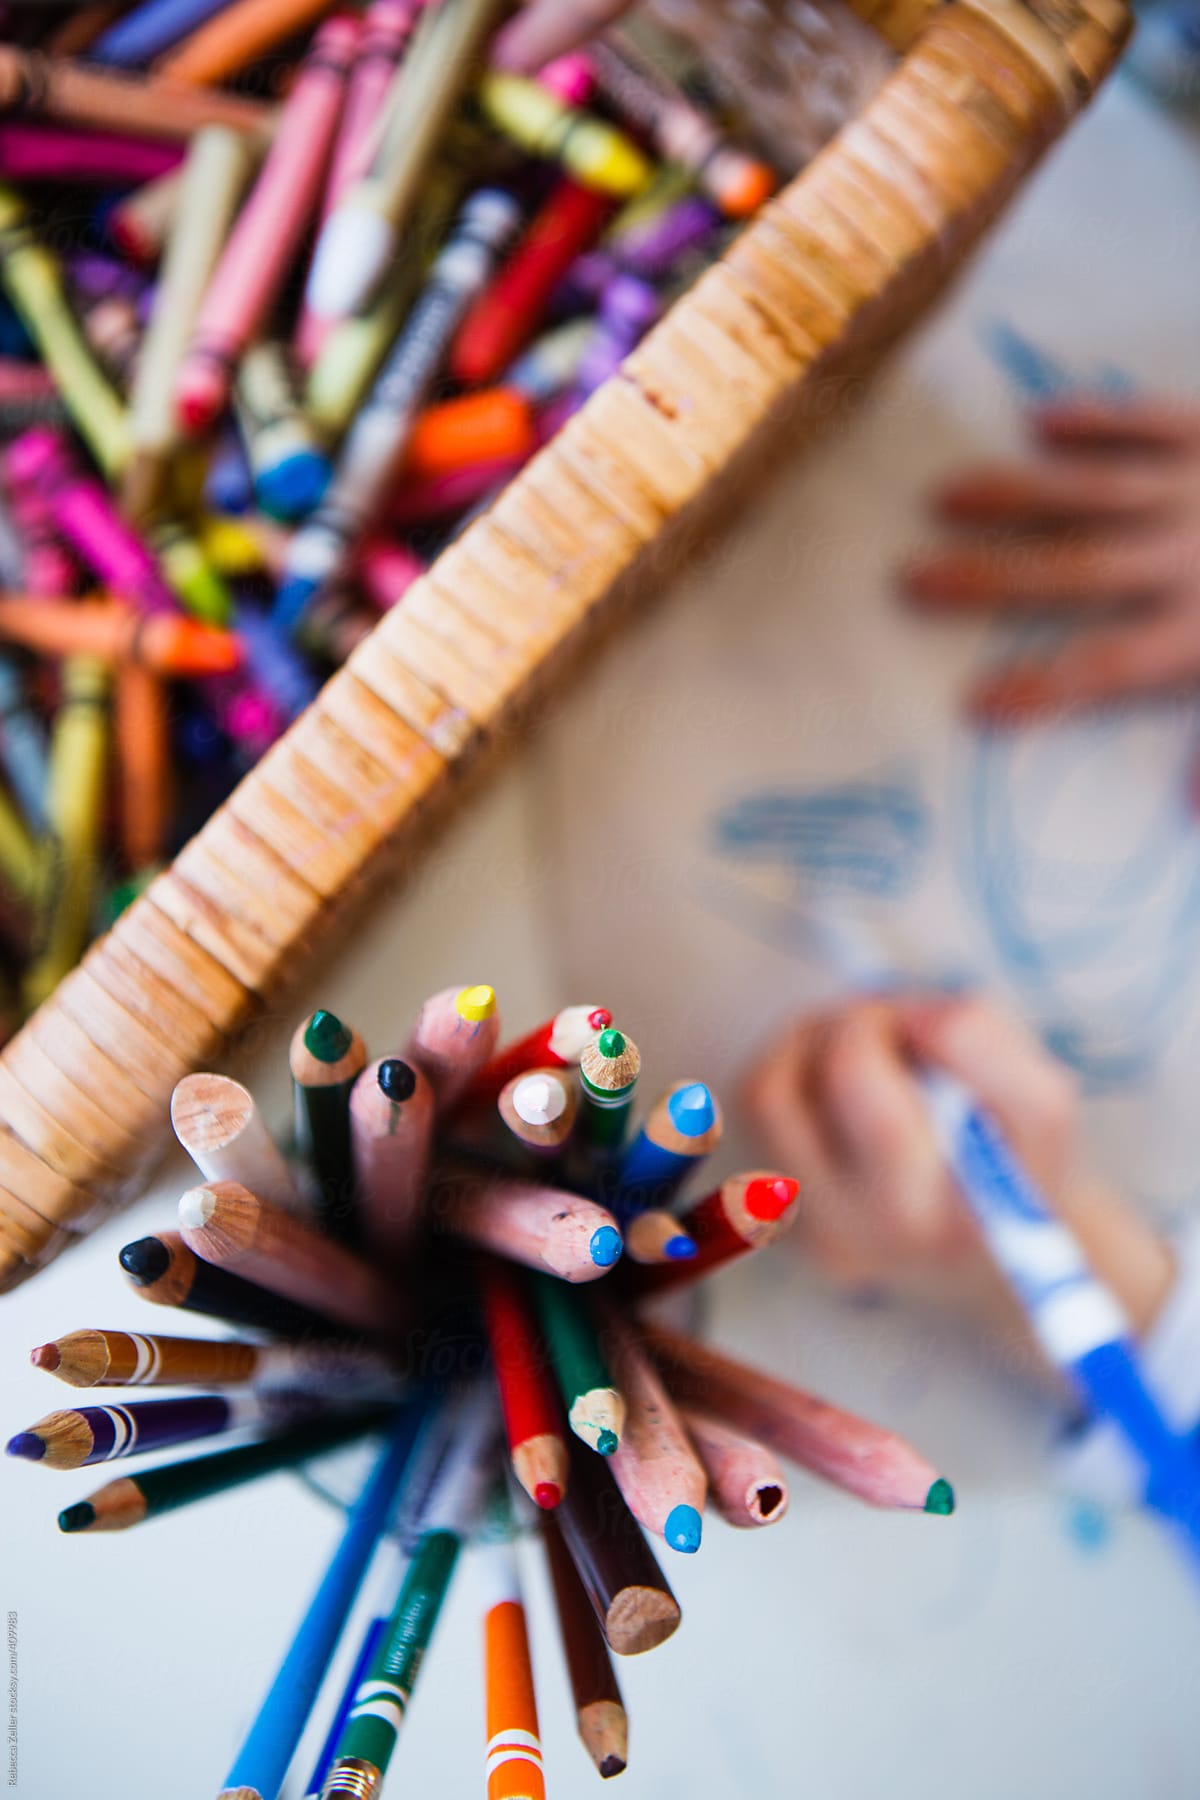 Toddler Hands Coloring With Markers, Colored Pencils, And Crayons by  Stocksy Contributor Rebecca Zeller - Stocksy